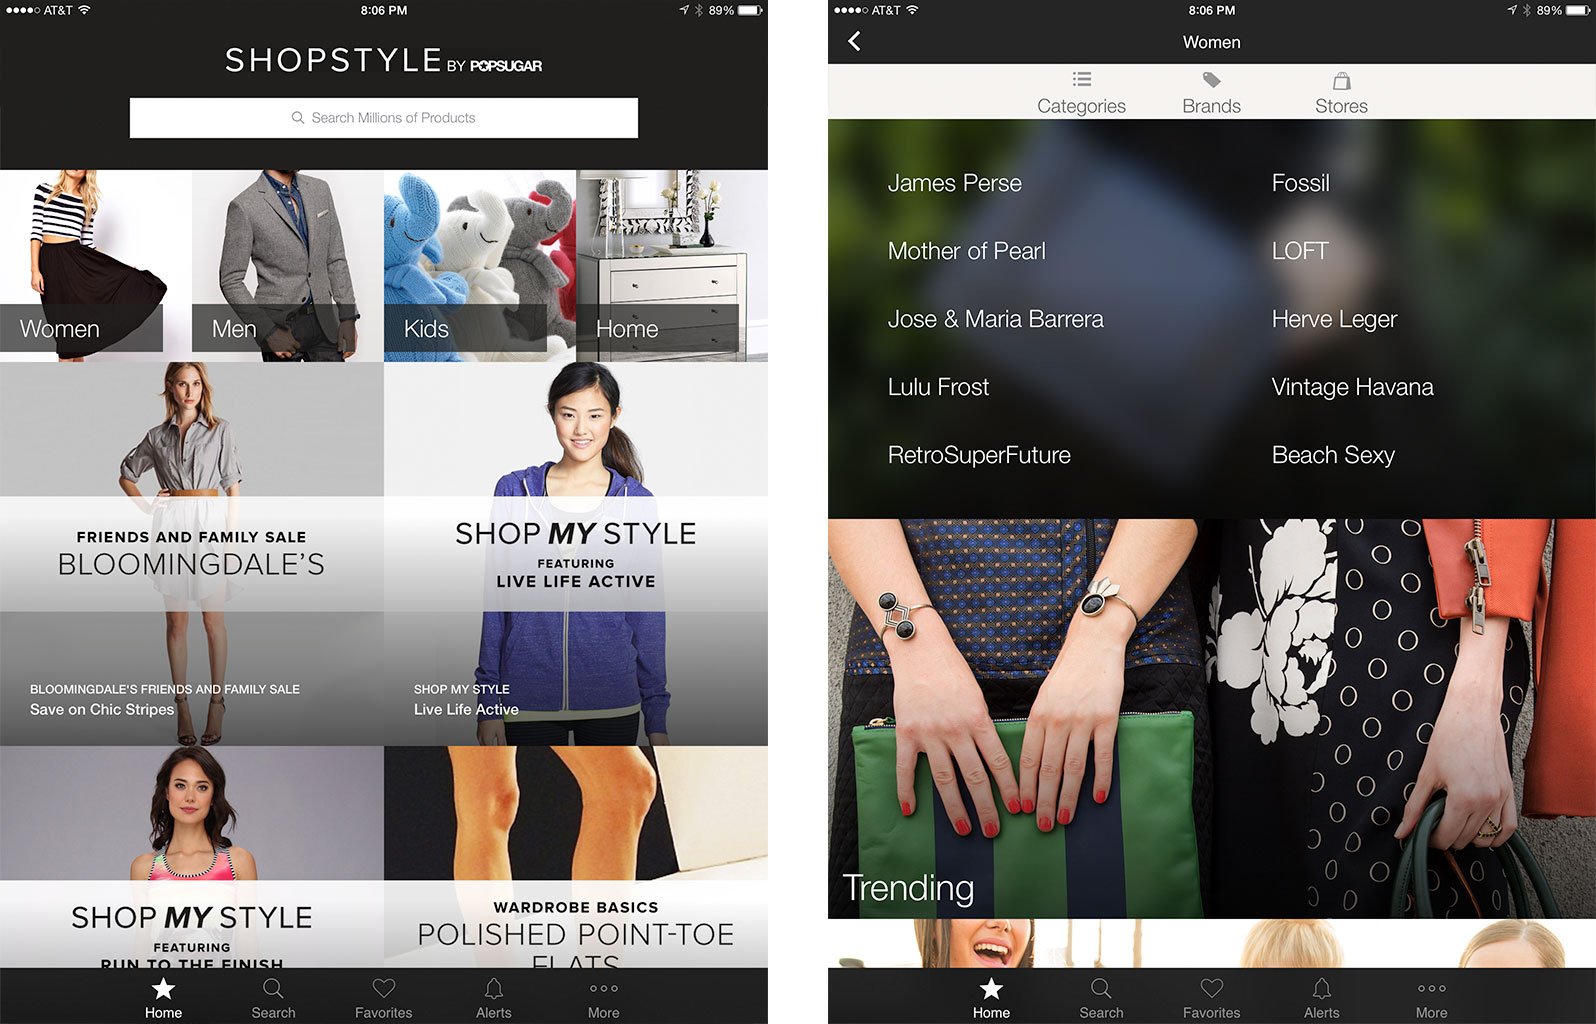 Best fashion apps for iPhone and iPad: Shopstyle